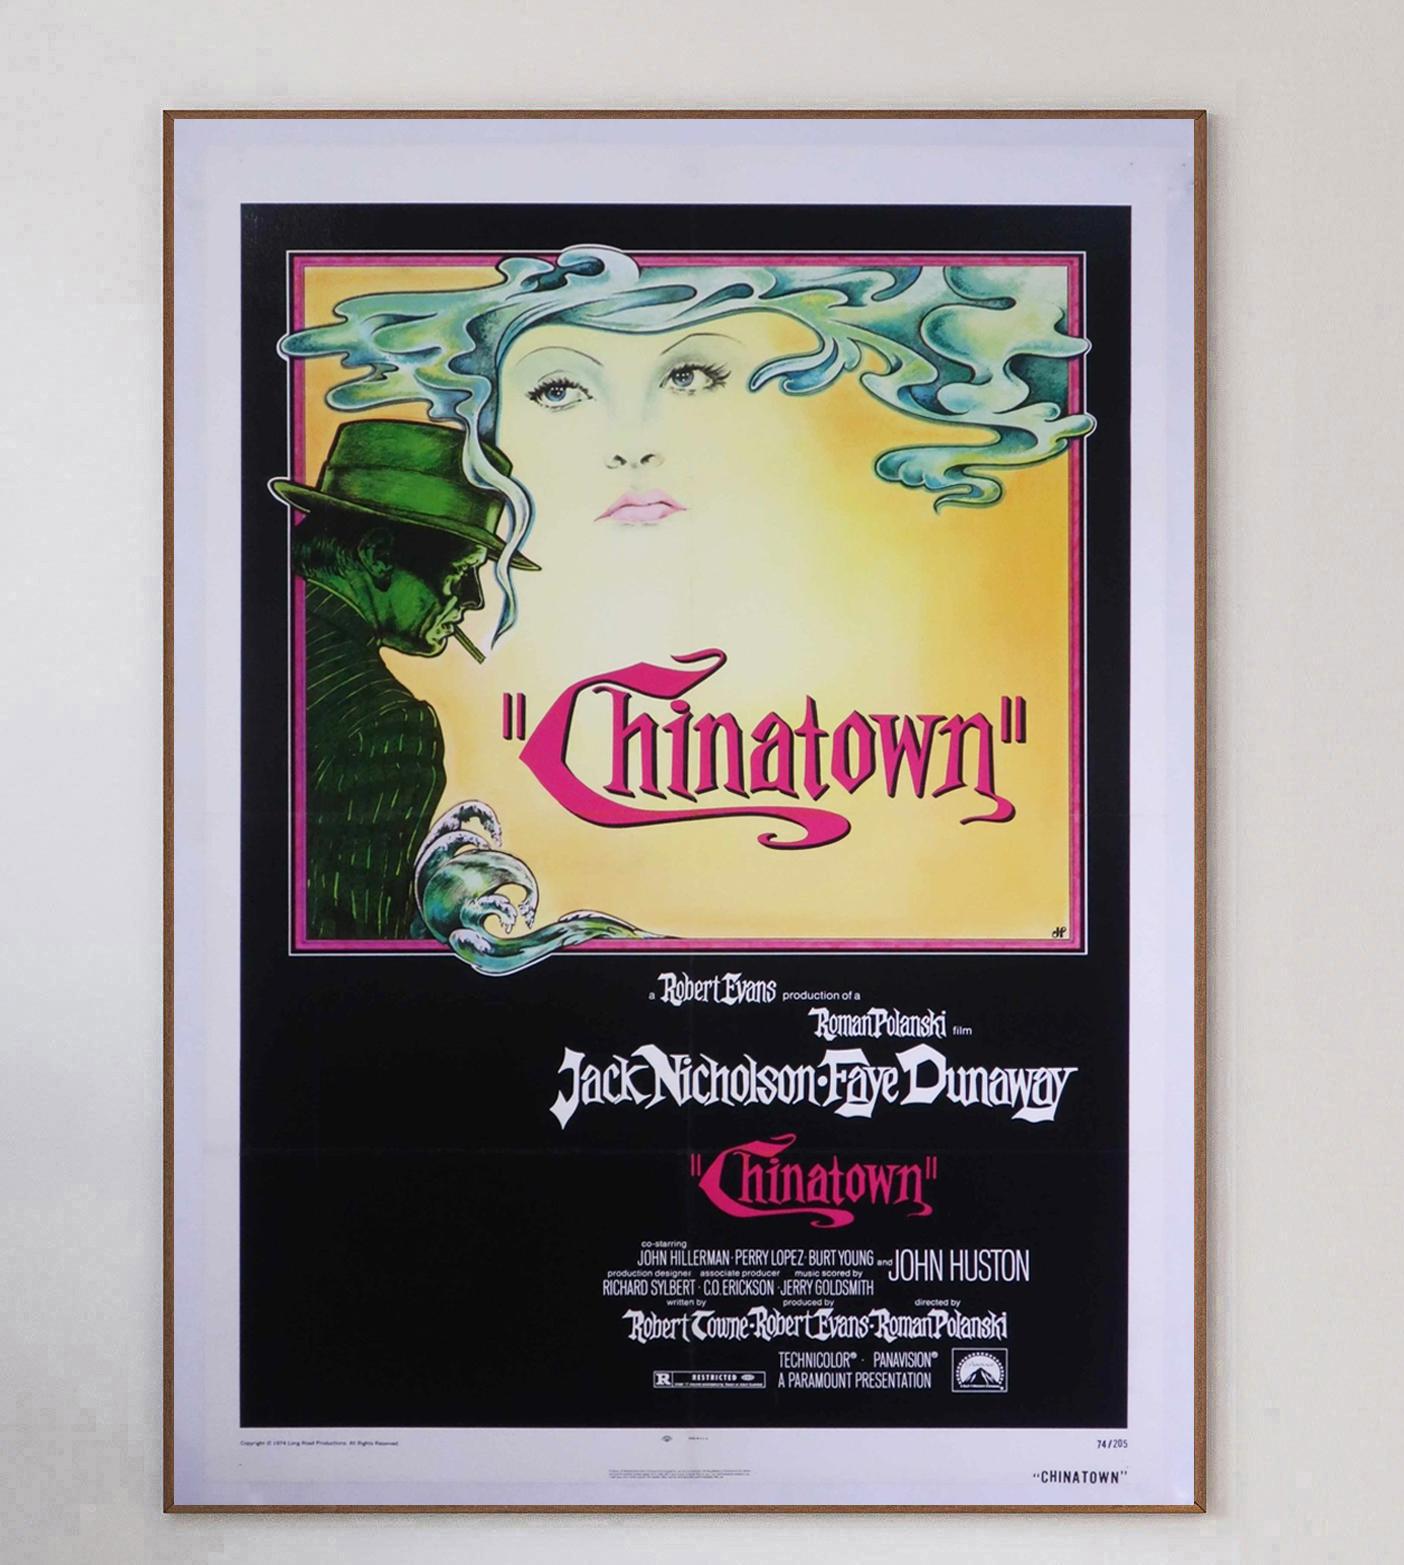 Chinatown is a 1974 American neo-noir mystery film directed by Roman Polanski from a screenplay by Robert Towne, starring Jack Nicholson and Faye Dunaway. The film is considered one of the greats of the later 20th century, nominated for 11